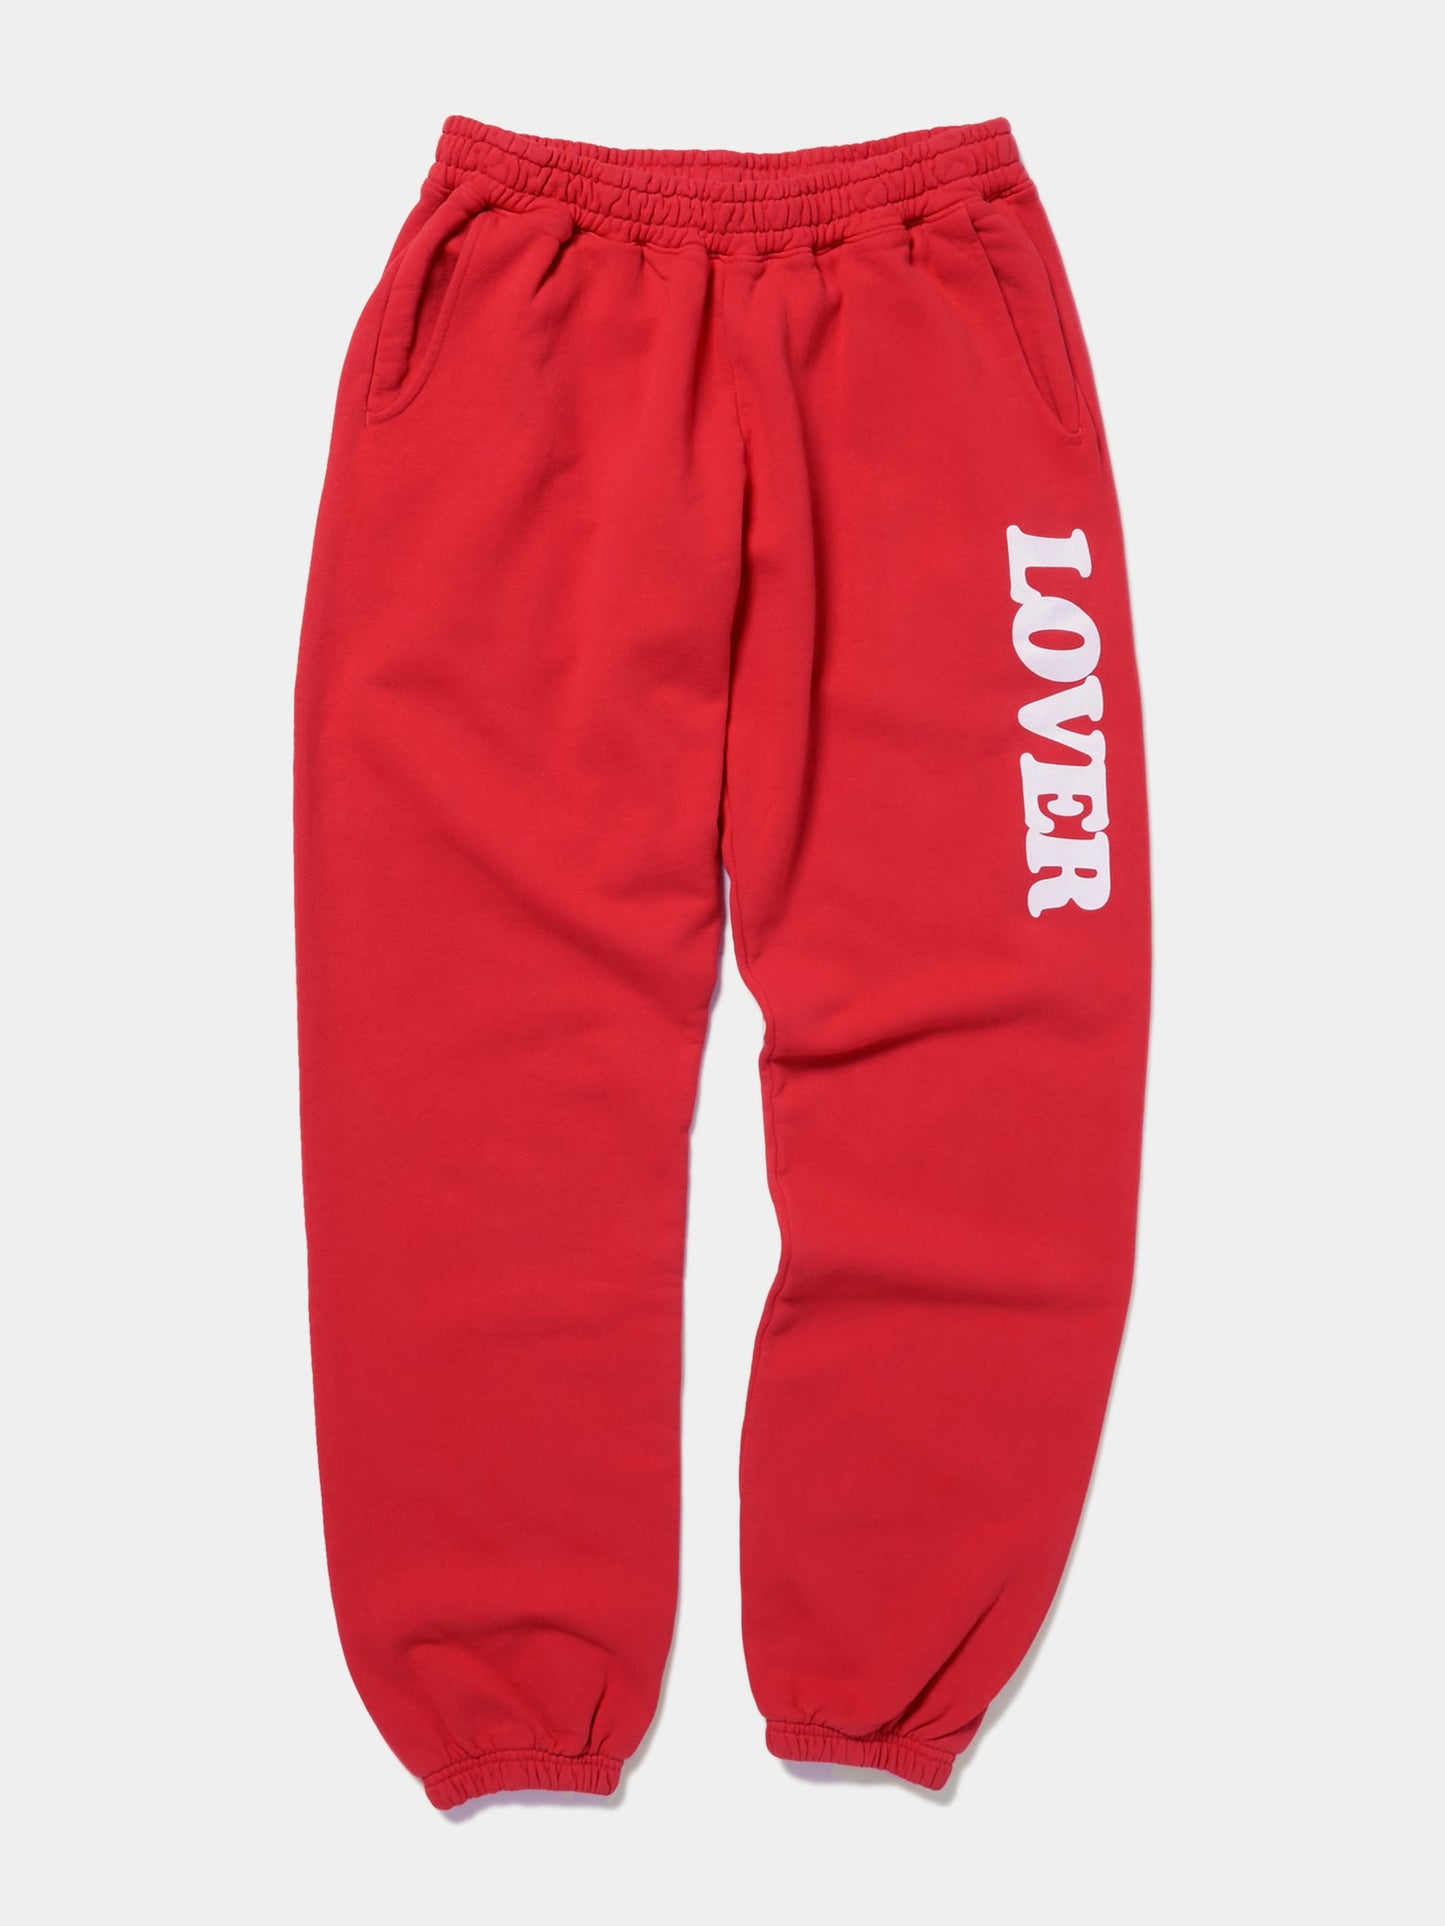 LOVER 10TH ANNIVERSARY SWEATPANTS (Red)